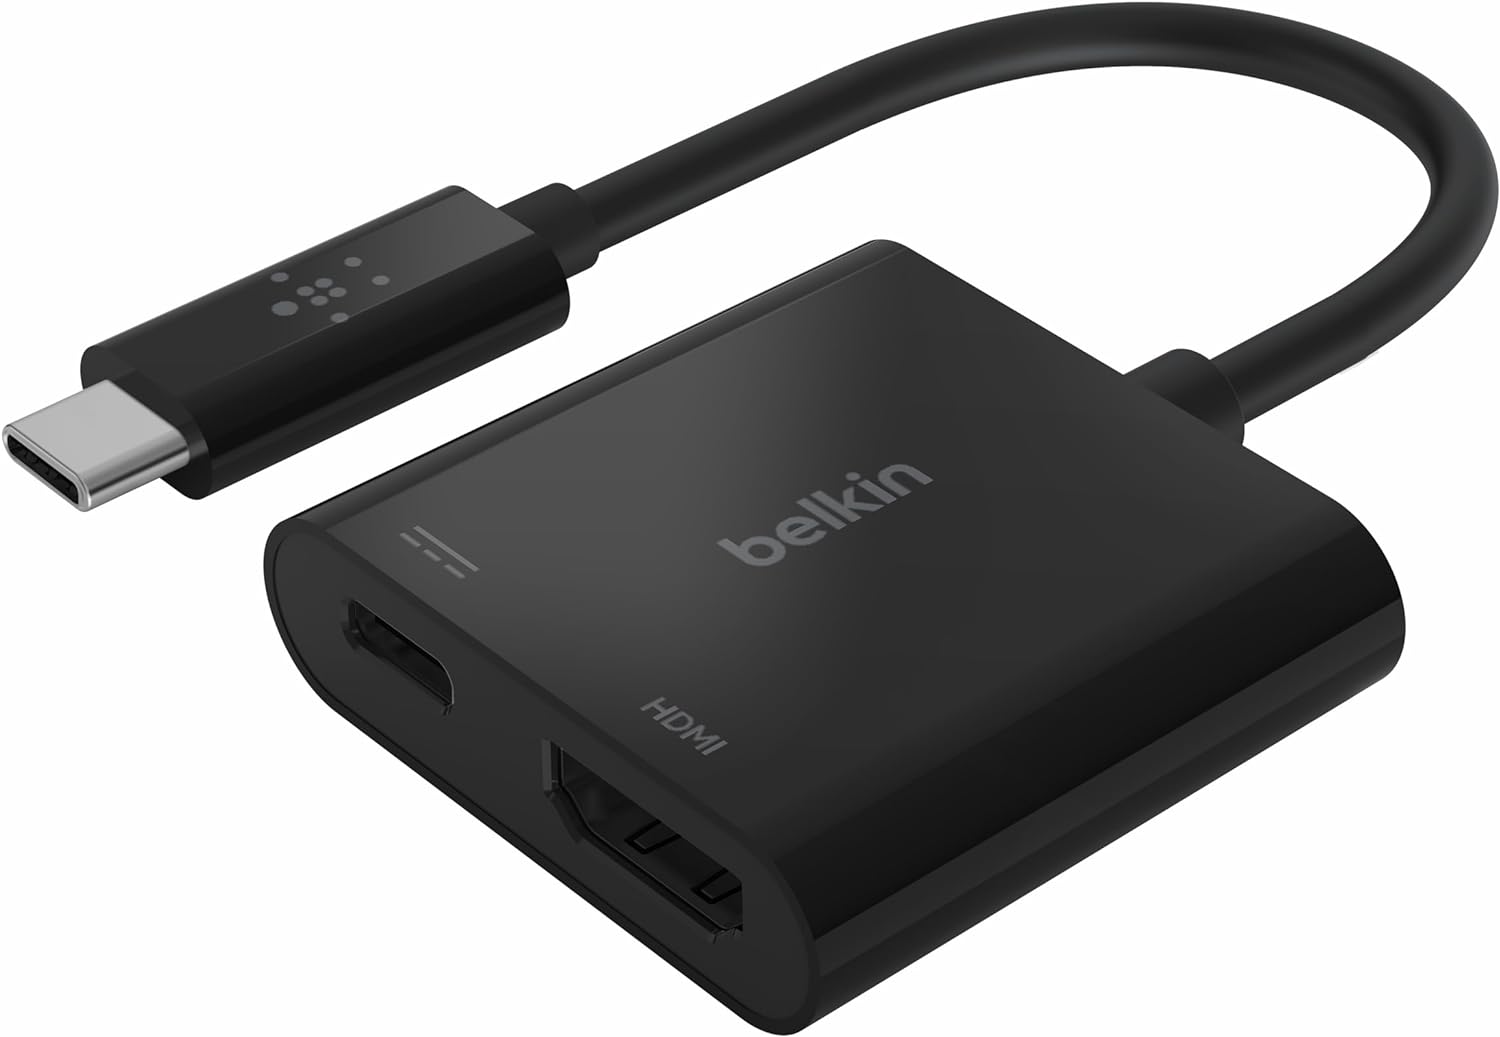 Belkin USB-C to HDMI Adapter + Charge (Supports 4K UHD Video, Passthrough Power up to 60W for Connected Devices) MacBook Pro HDMI Adapter